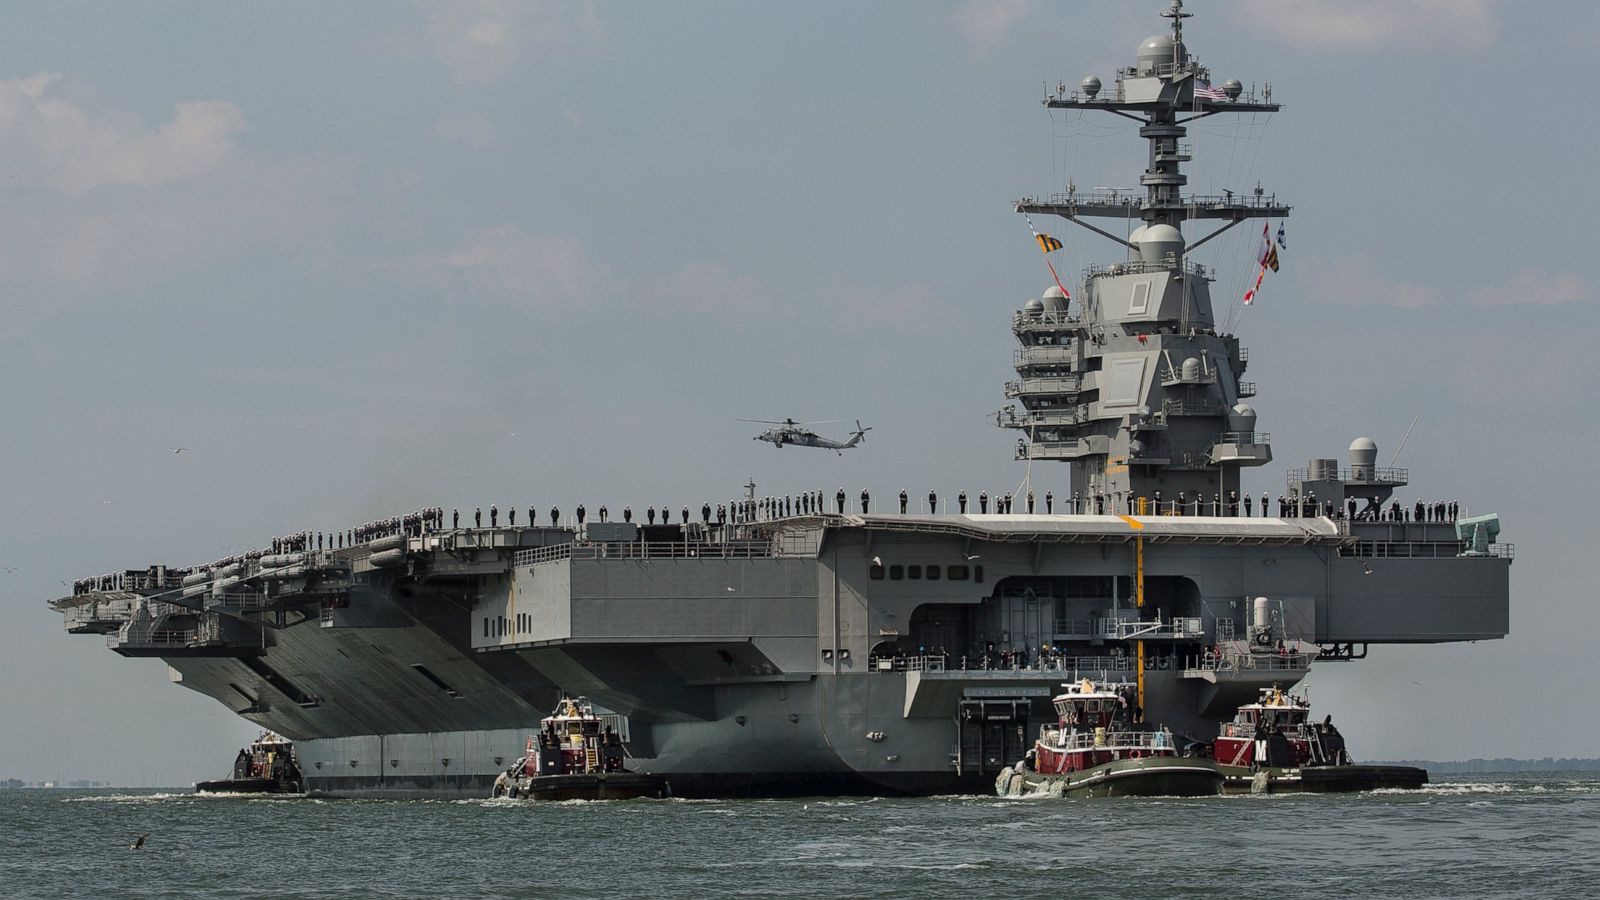 Report: Navy ships need $400K 'flushes' to unclog toilets